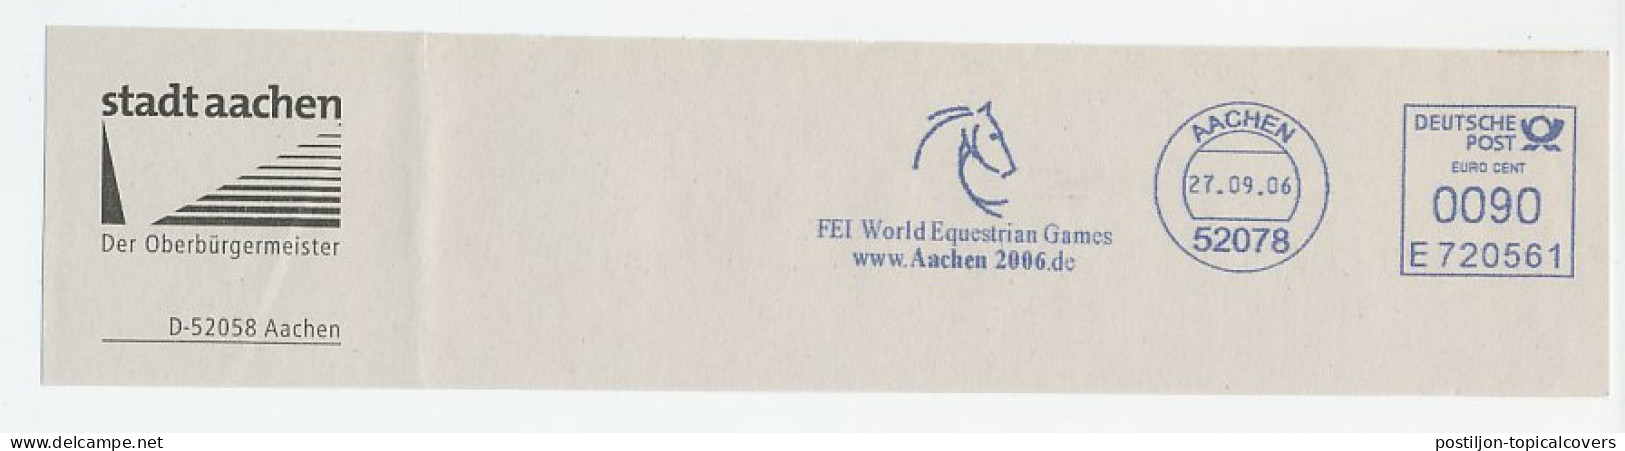 Meter Top Cut Germany 2006 FEI - World Equestrian Games  - Reitsport